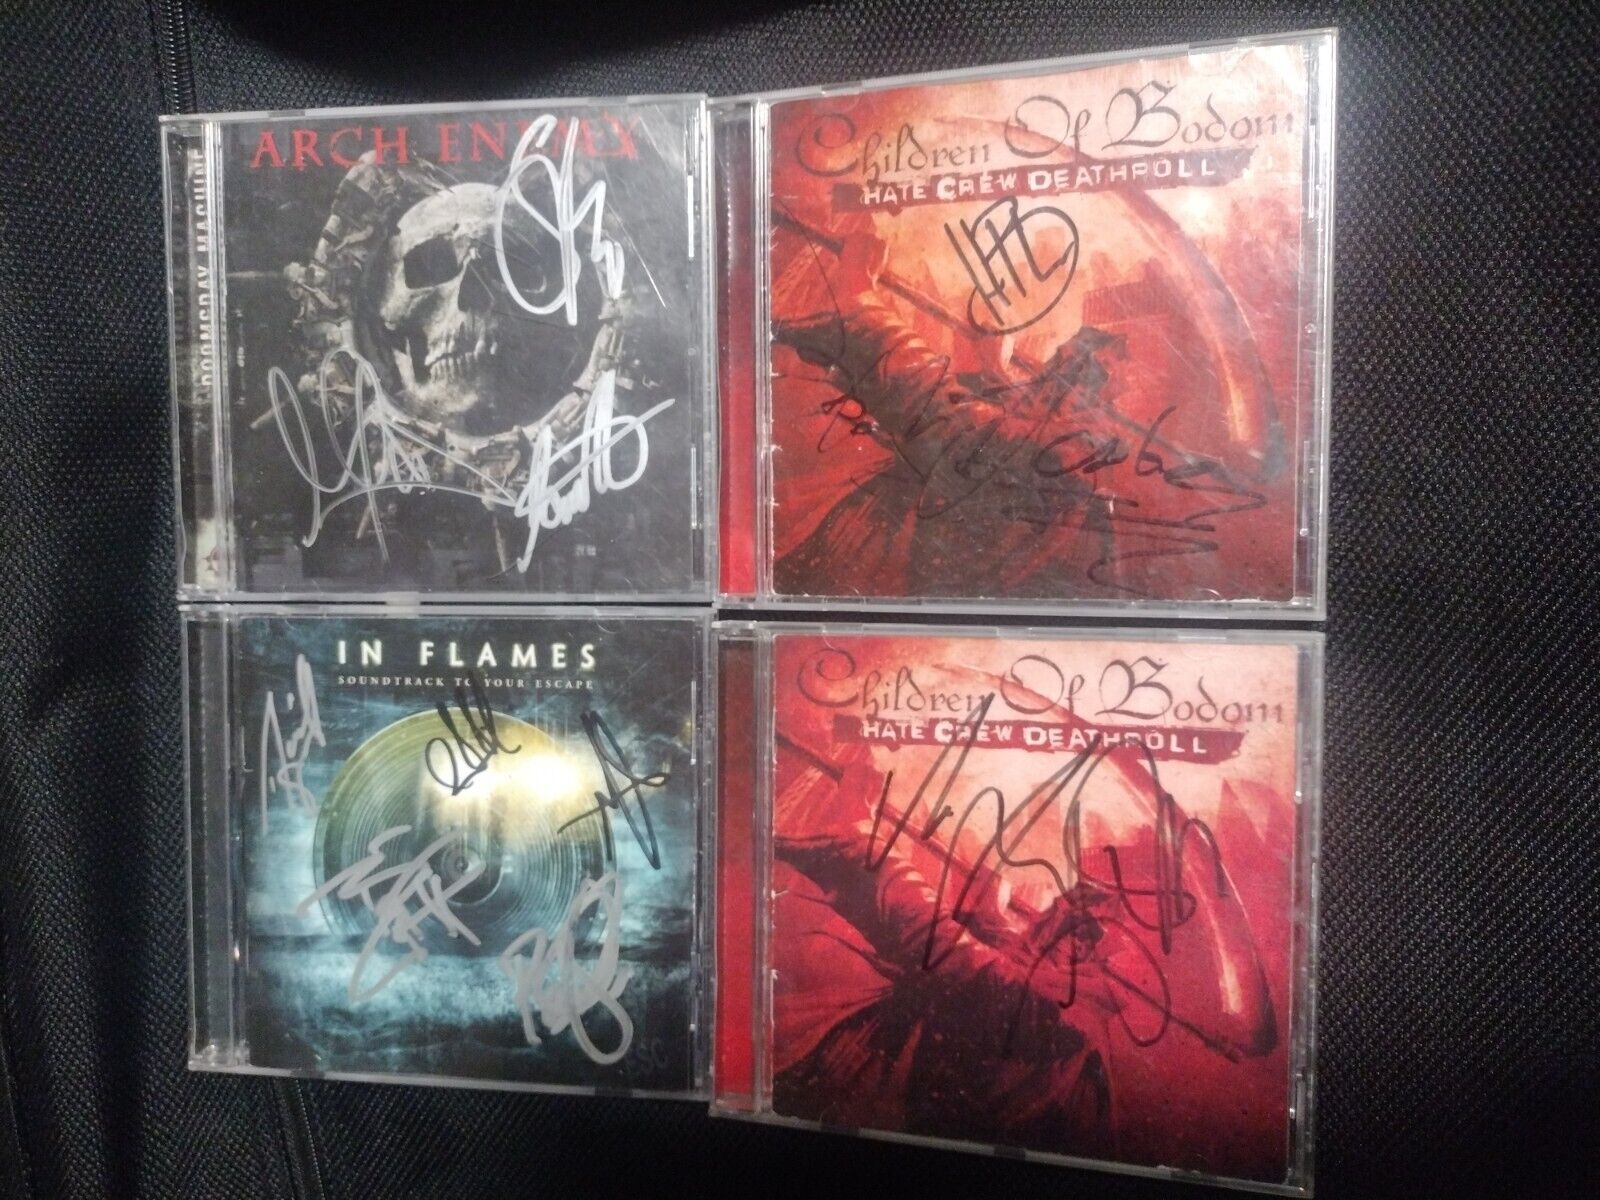 4 different autographed metal cds